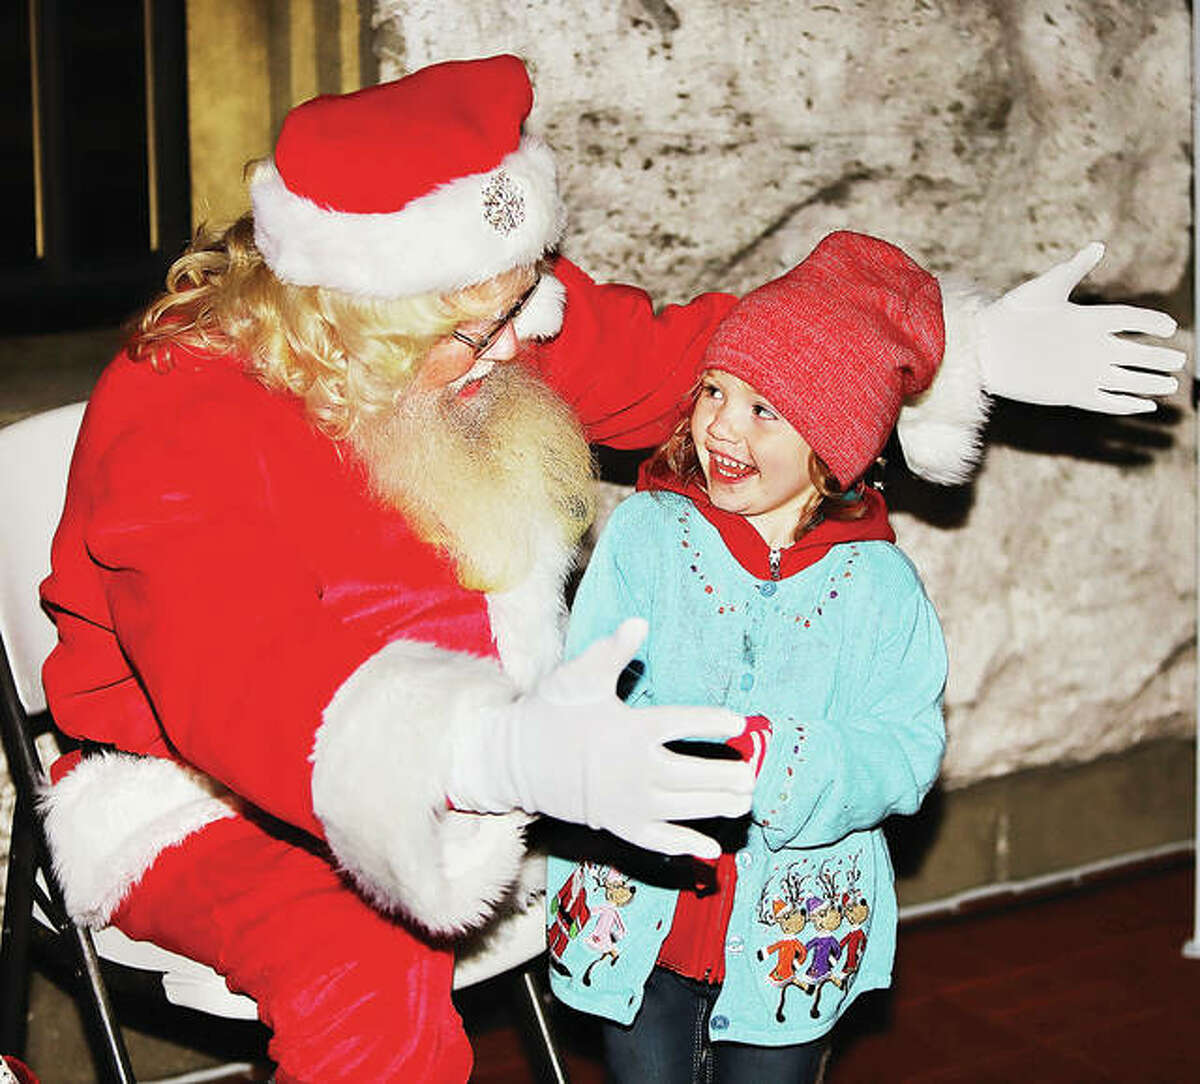 Santa Claus holds out his arms to give a big welcome and hug to Alayna Ahlin, 3, of Jerseyville, as she meets him Friday night at the 25th Annual Community Tree Lighting in Lincoln-Douglas Square in Alton. Several hundred people showed up to see Santa, listen to Christmas carols and see the downtown tree lit.